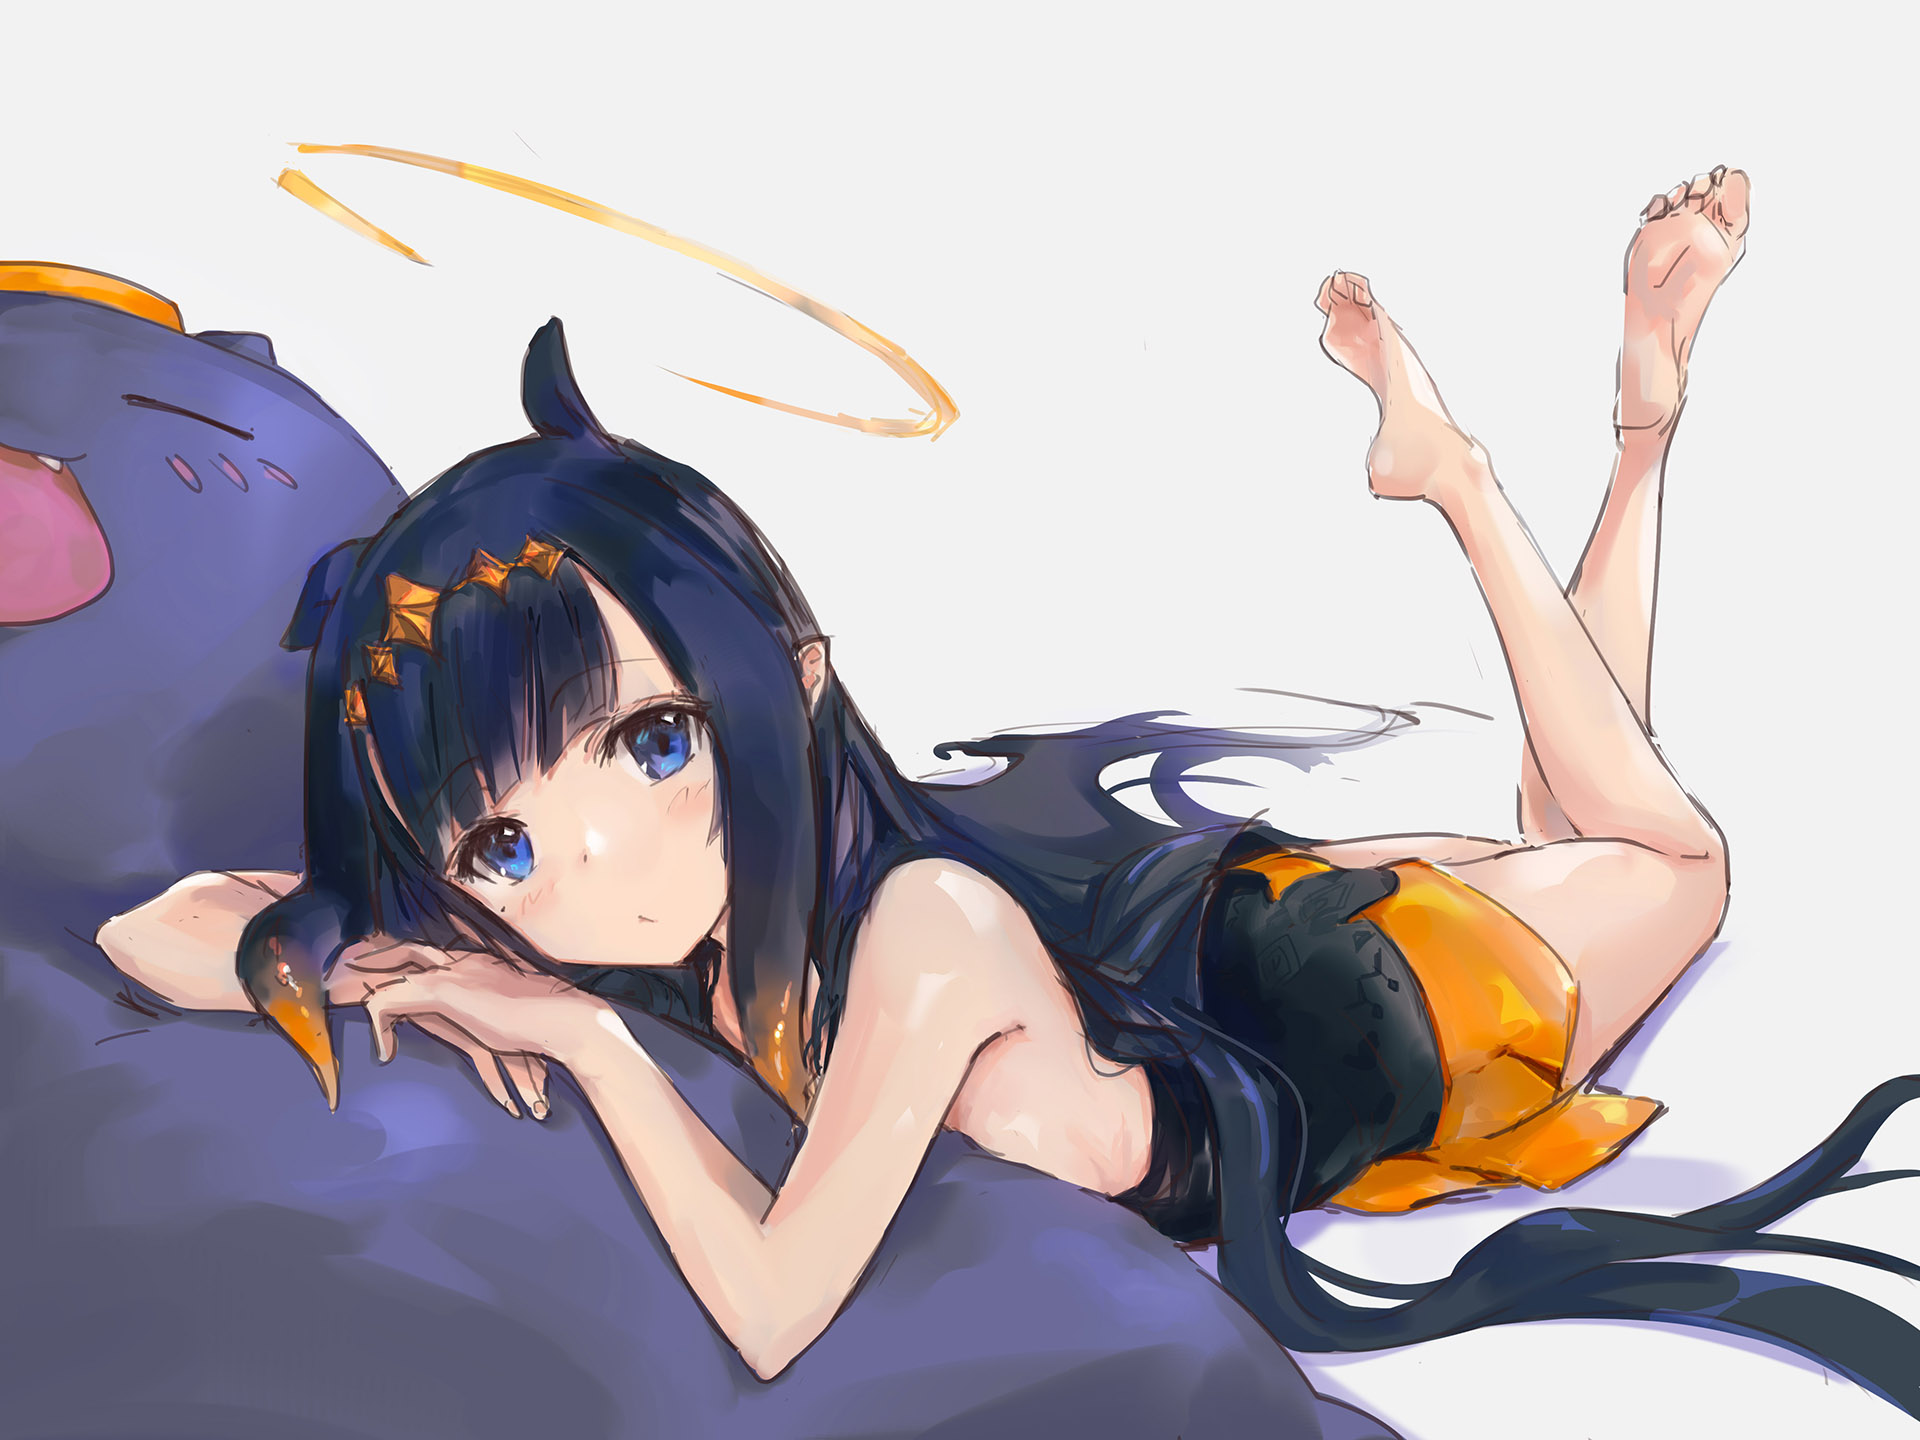 live wallpapers bare foot anime girls